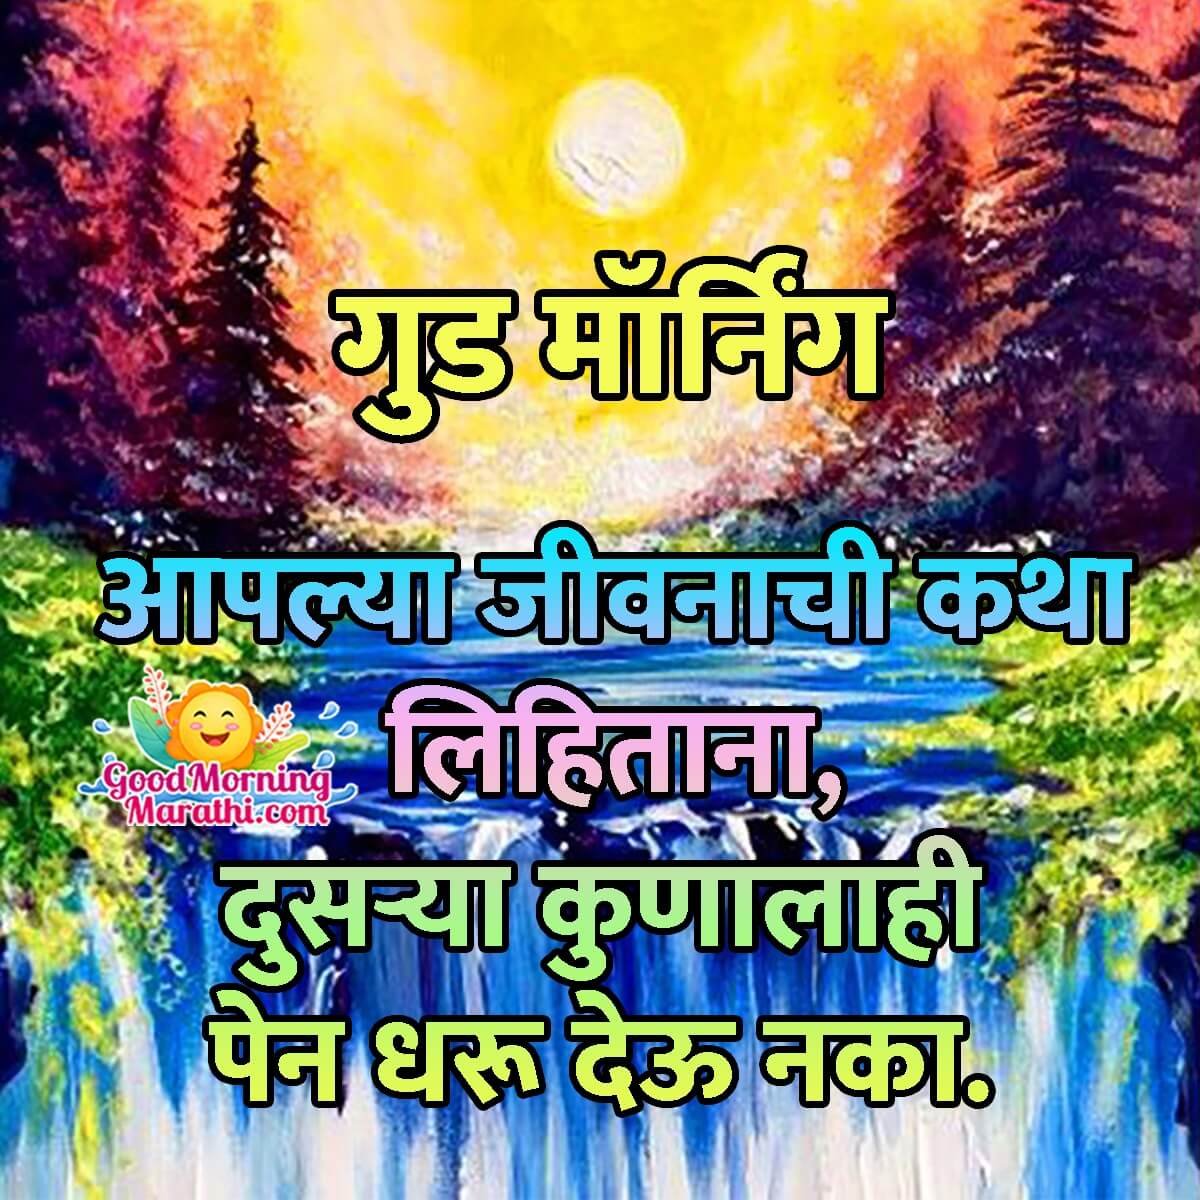 Good Morning Life Quote In Marathi